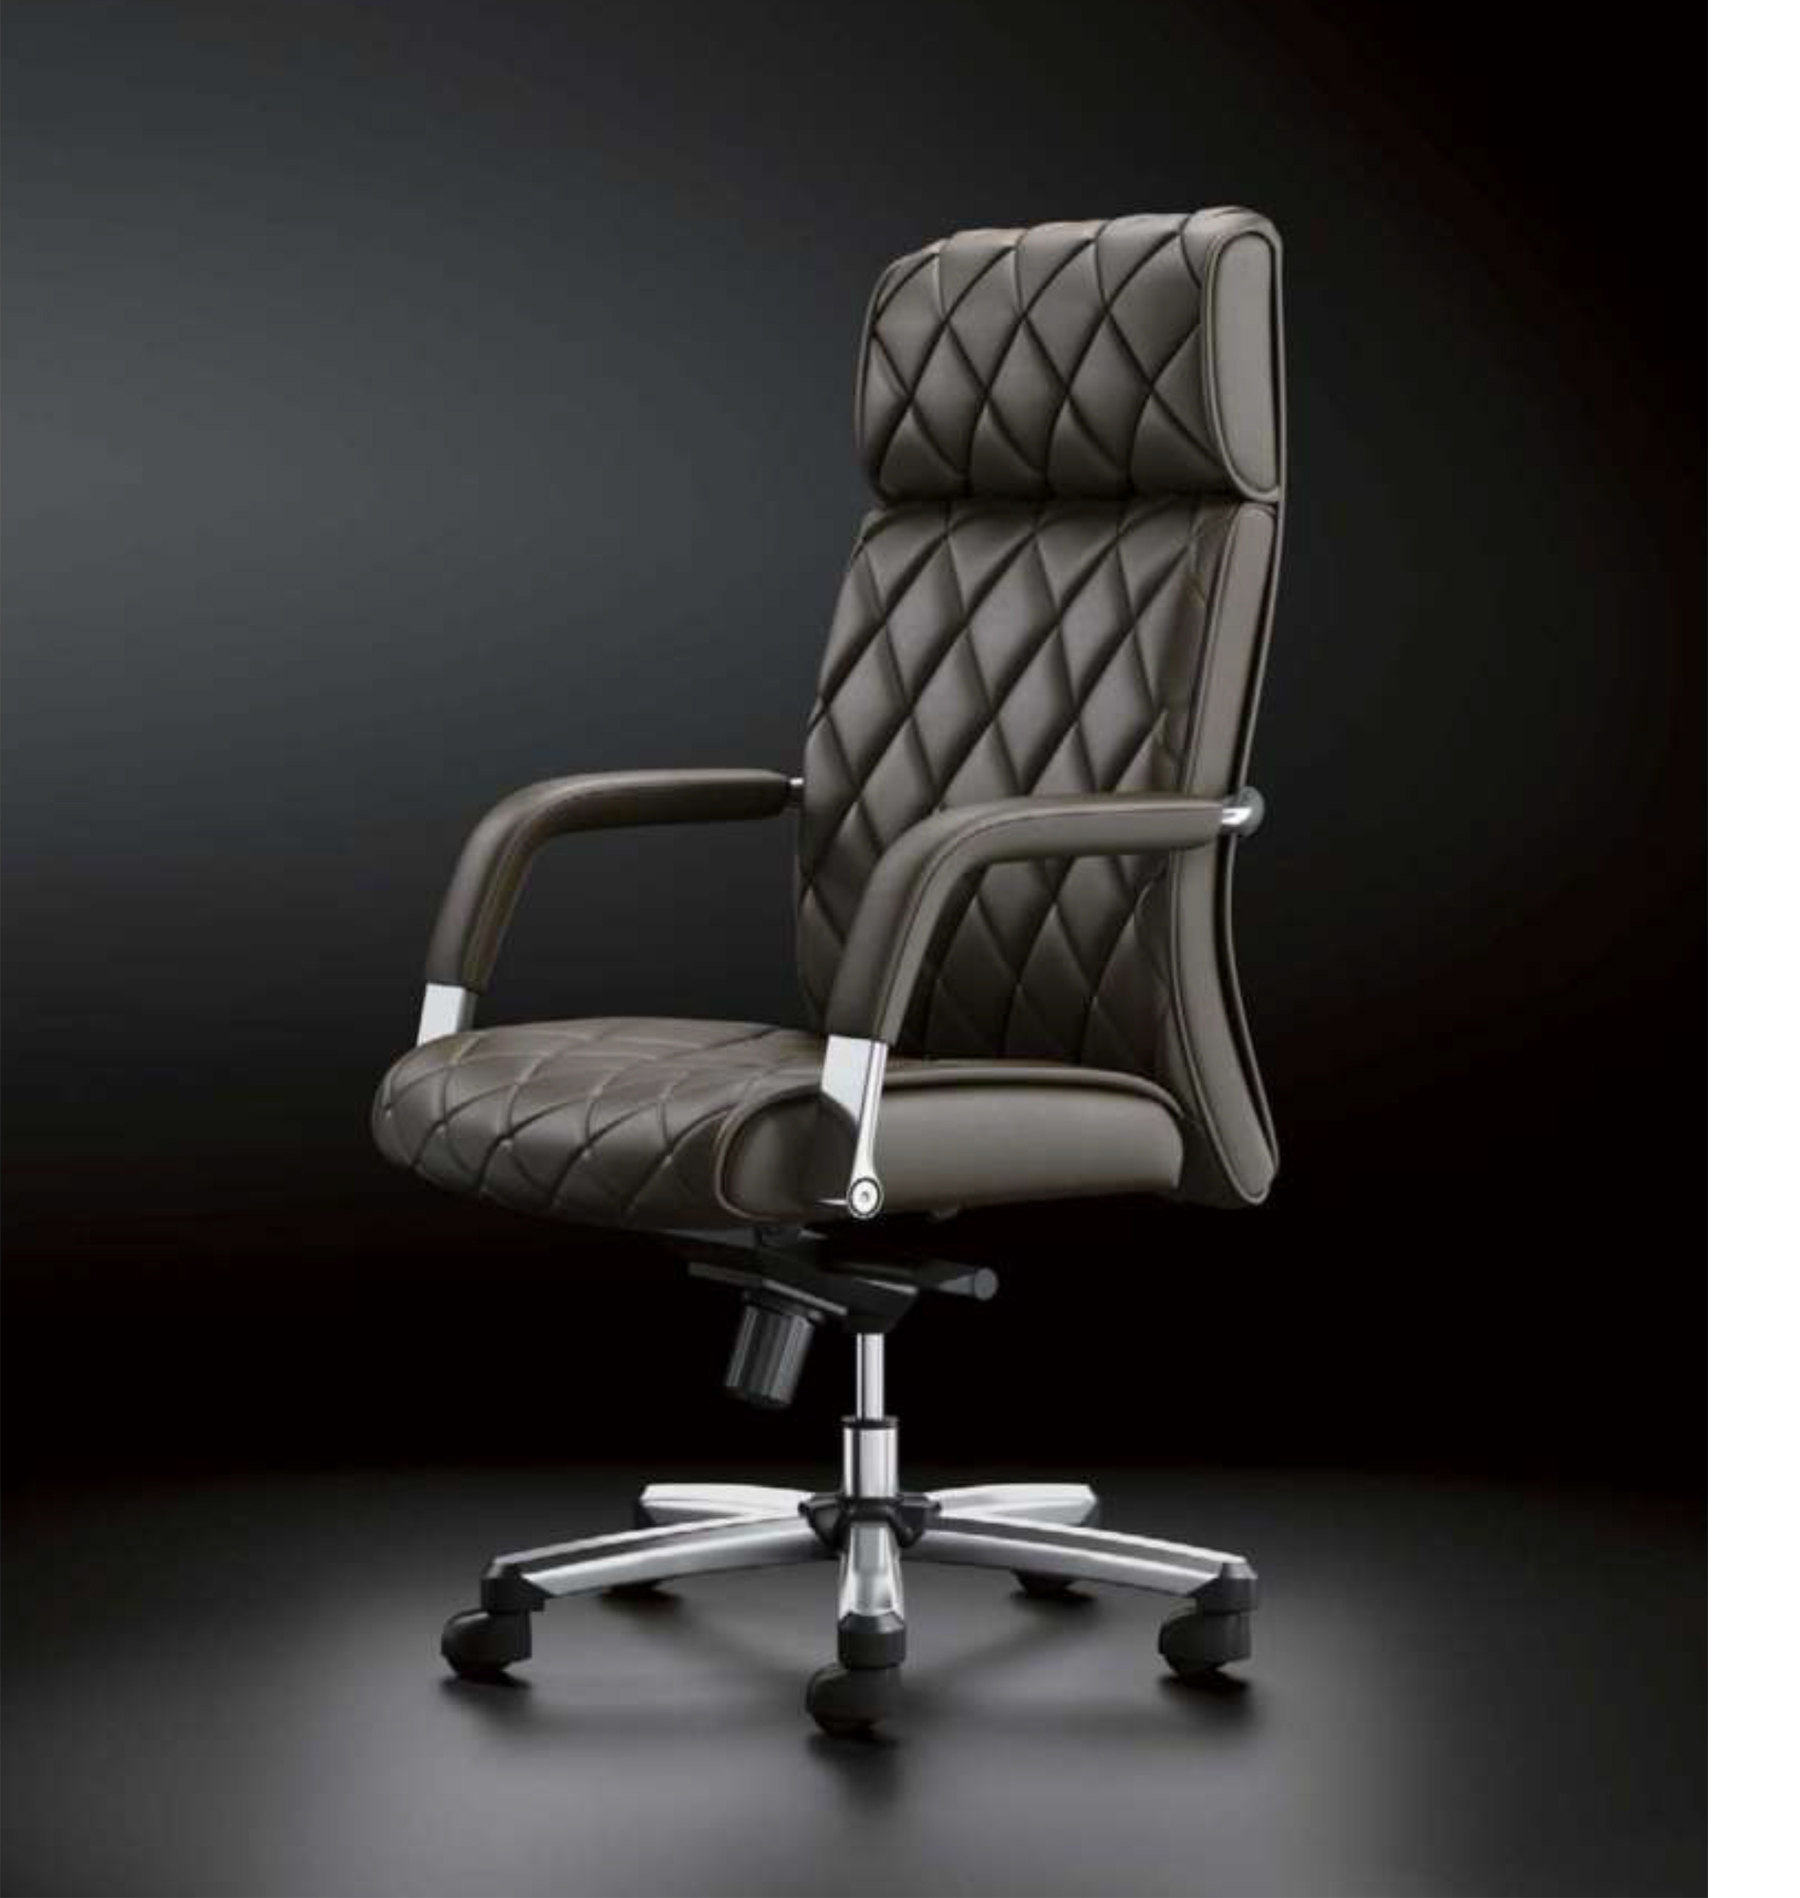 Do you know the Top Rated Ergonomic Office Chairs? Premium Office